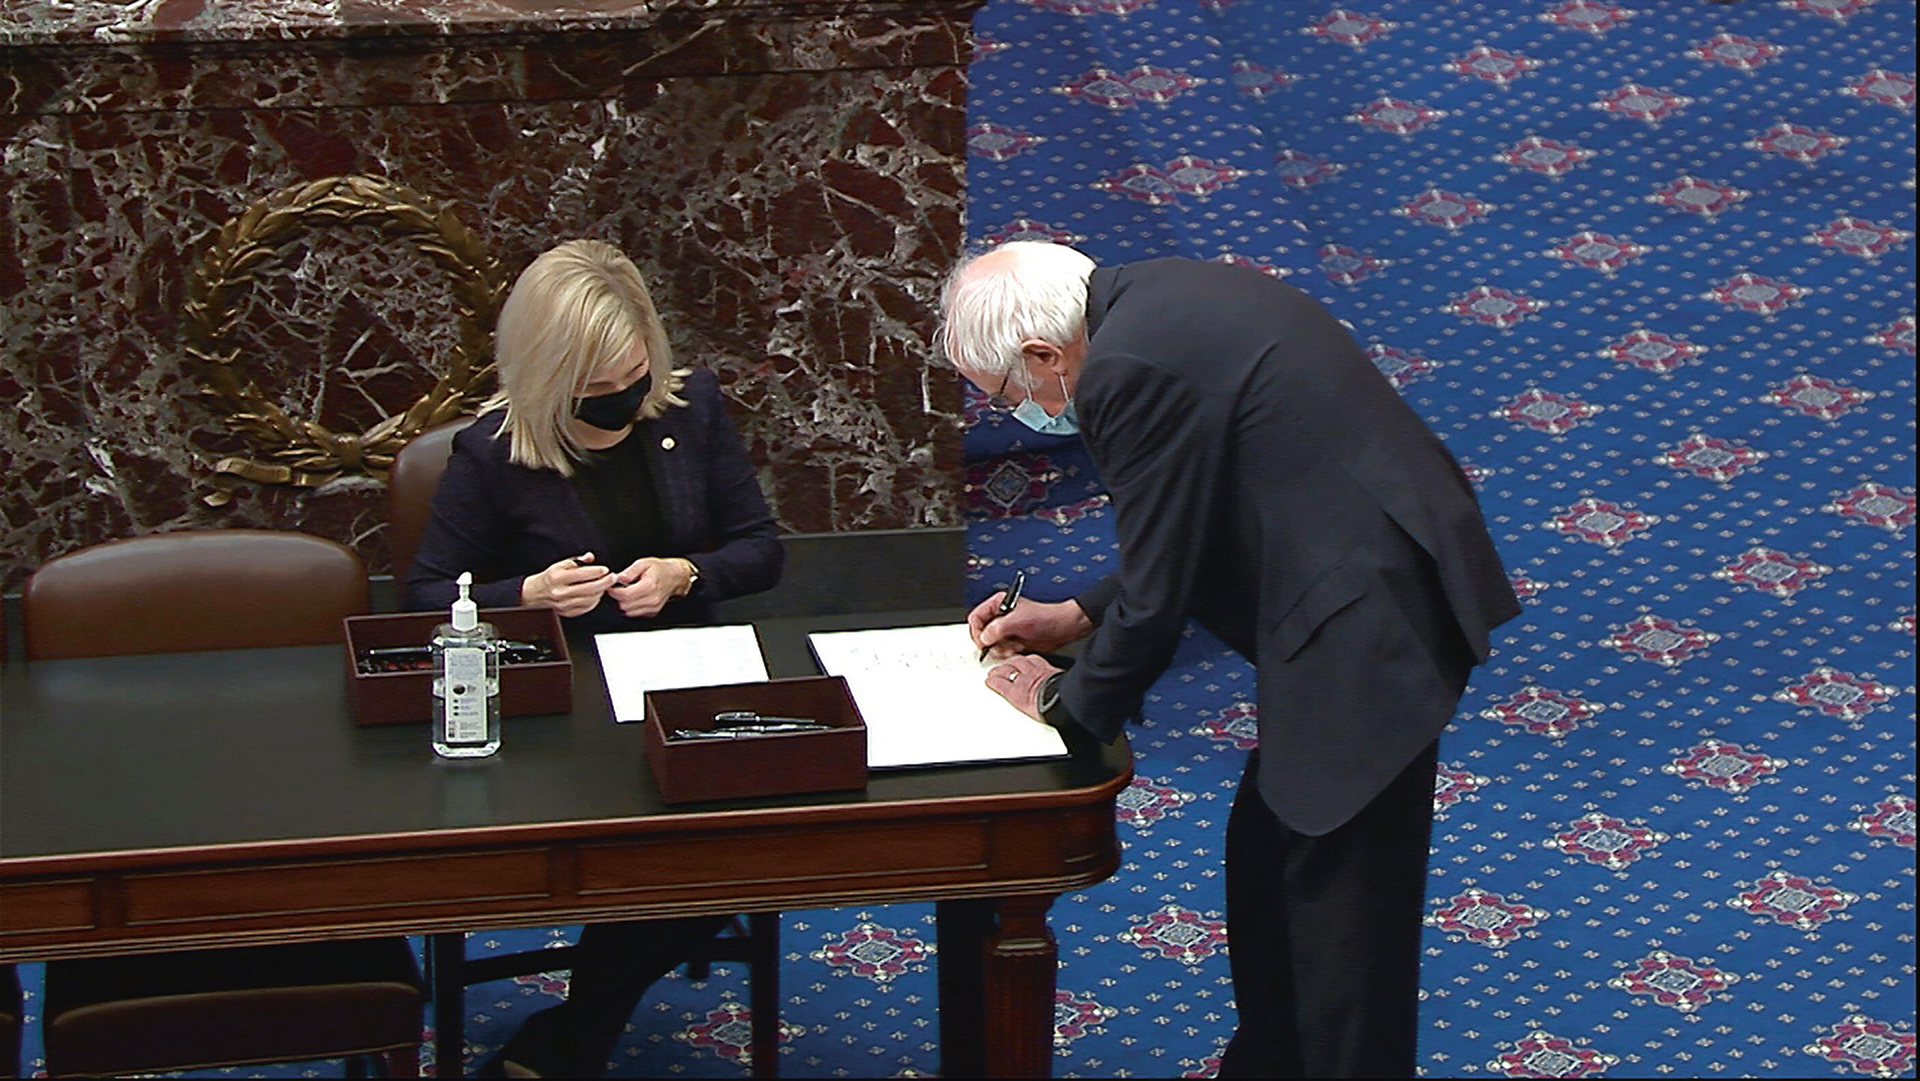 Bernie Sanders signs the oath book for the impeachment trial of Donald Trump, January 2021